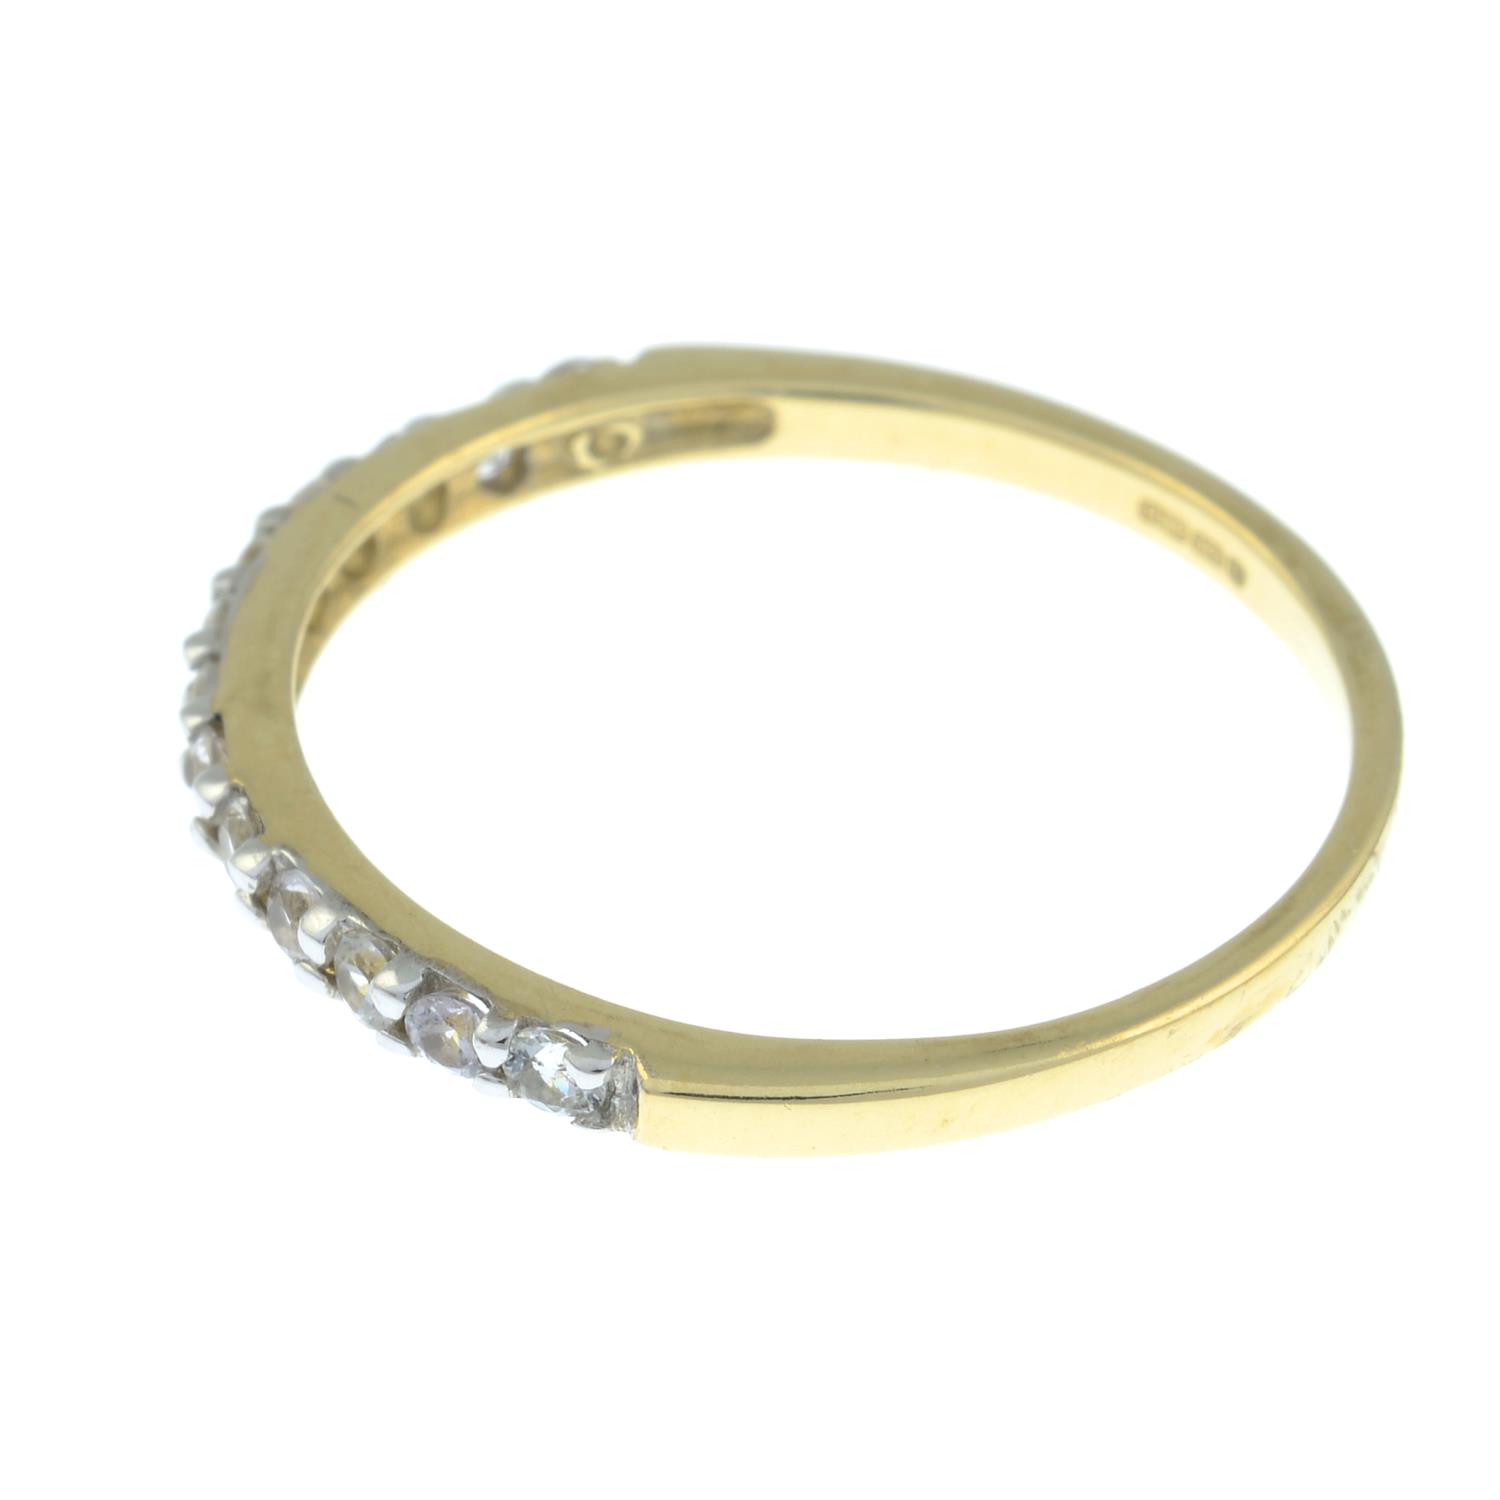 Seven 9ct gold white sapphire and colourless zircon half eternity rings.Hallmarks for 9ct gold. - Image 4 of 4